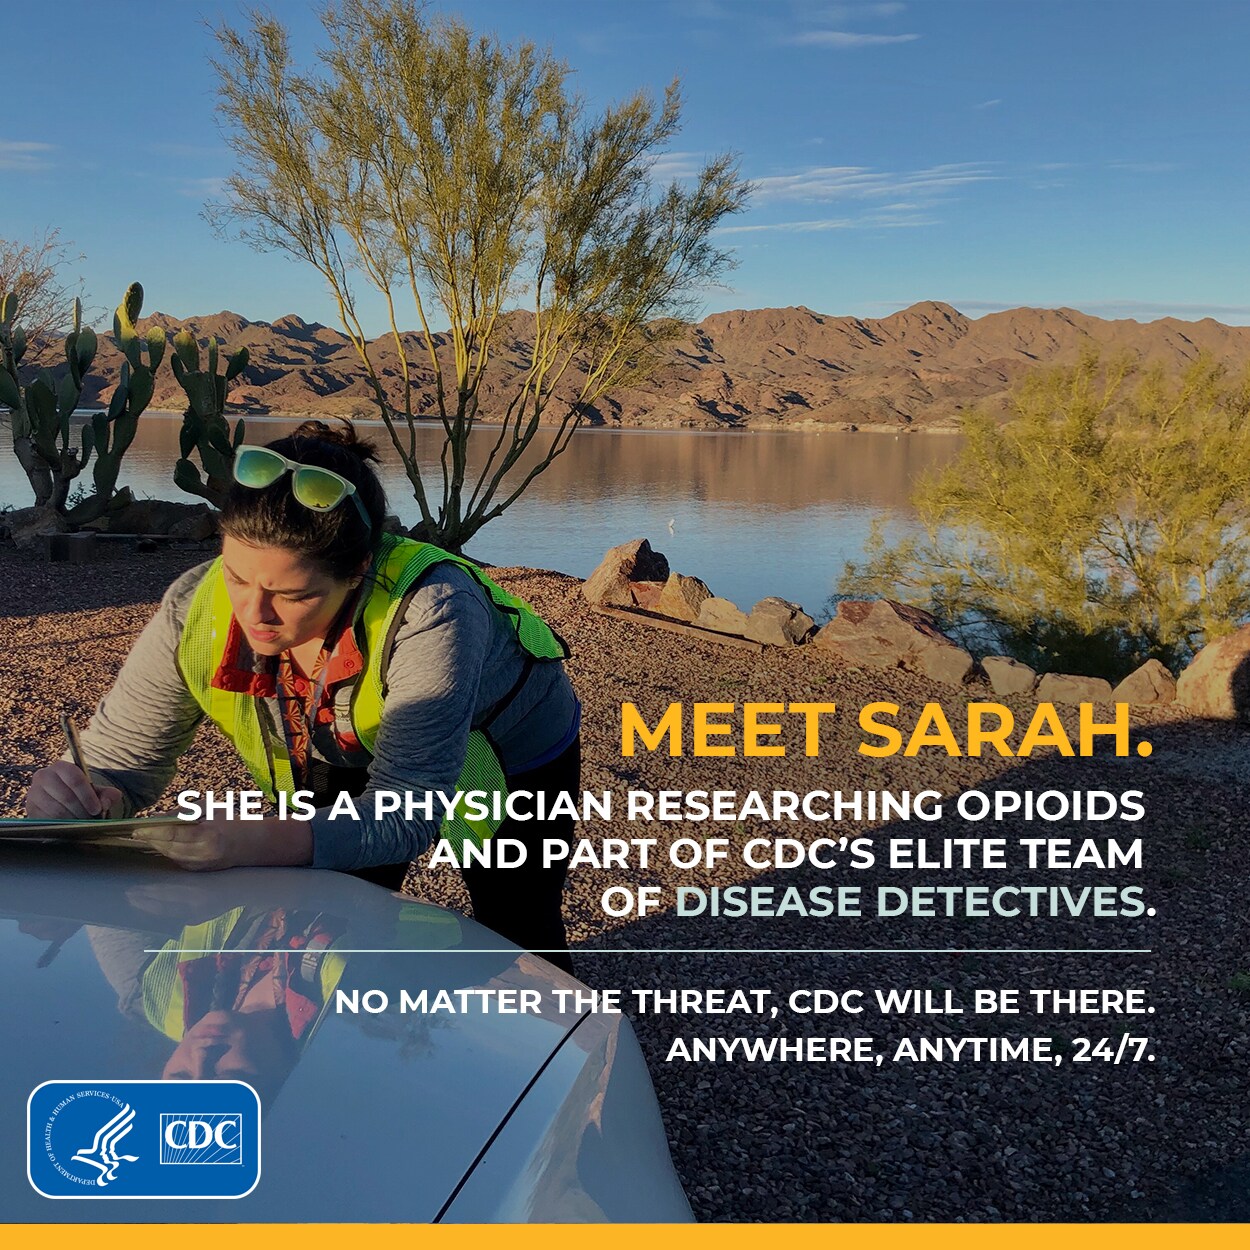 Meet Sarah. She is a physician researching opioids and part of CDC's Elite Team of Disease Detectives. No matter the threat, CDC Will be there. Anywhere, Anytime, 24/7.